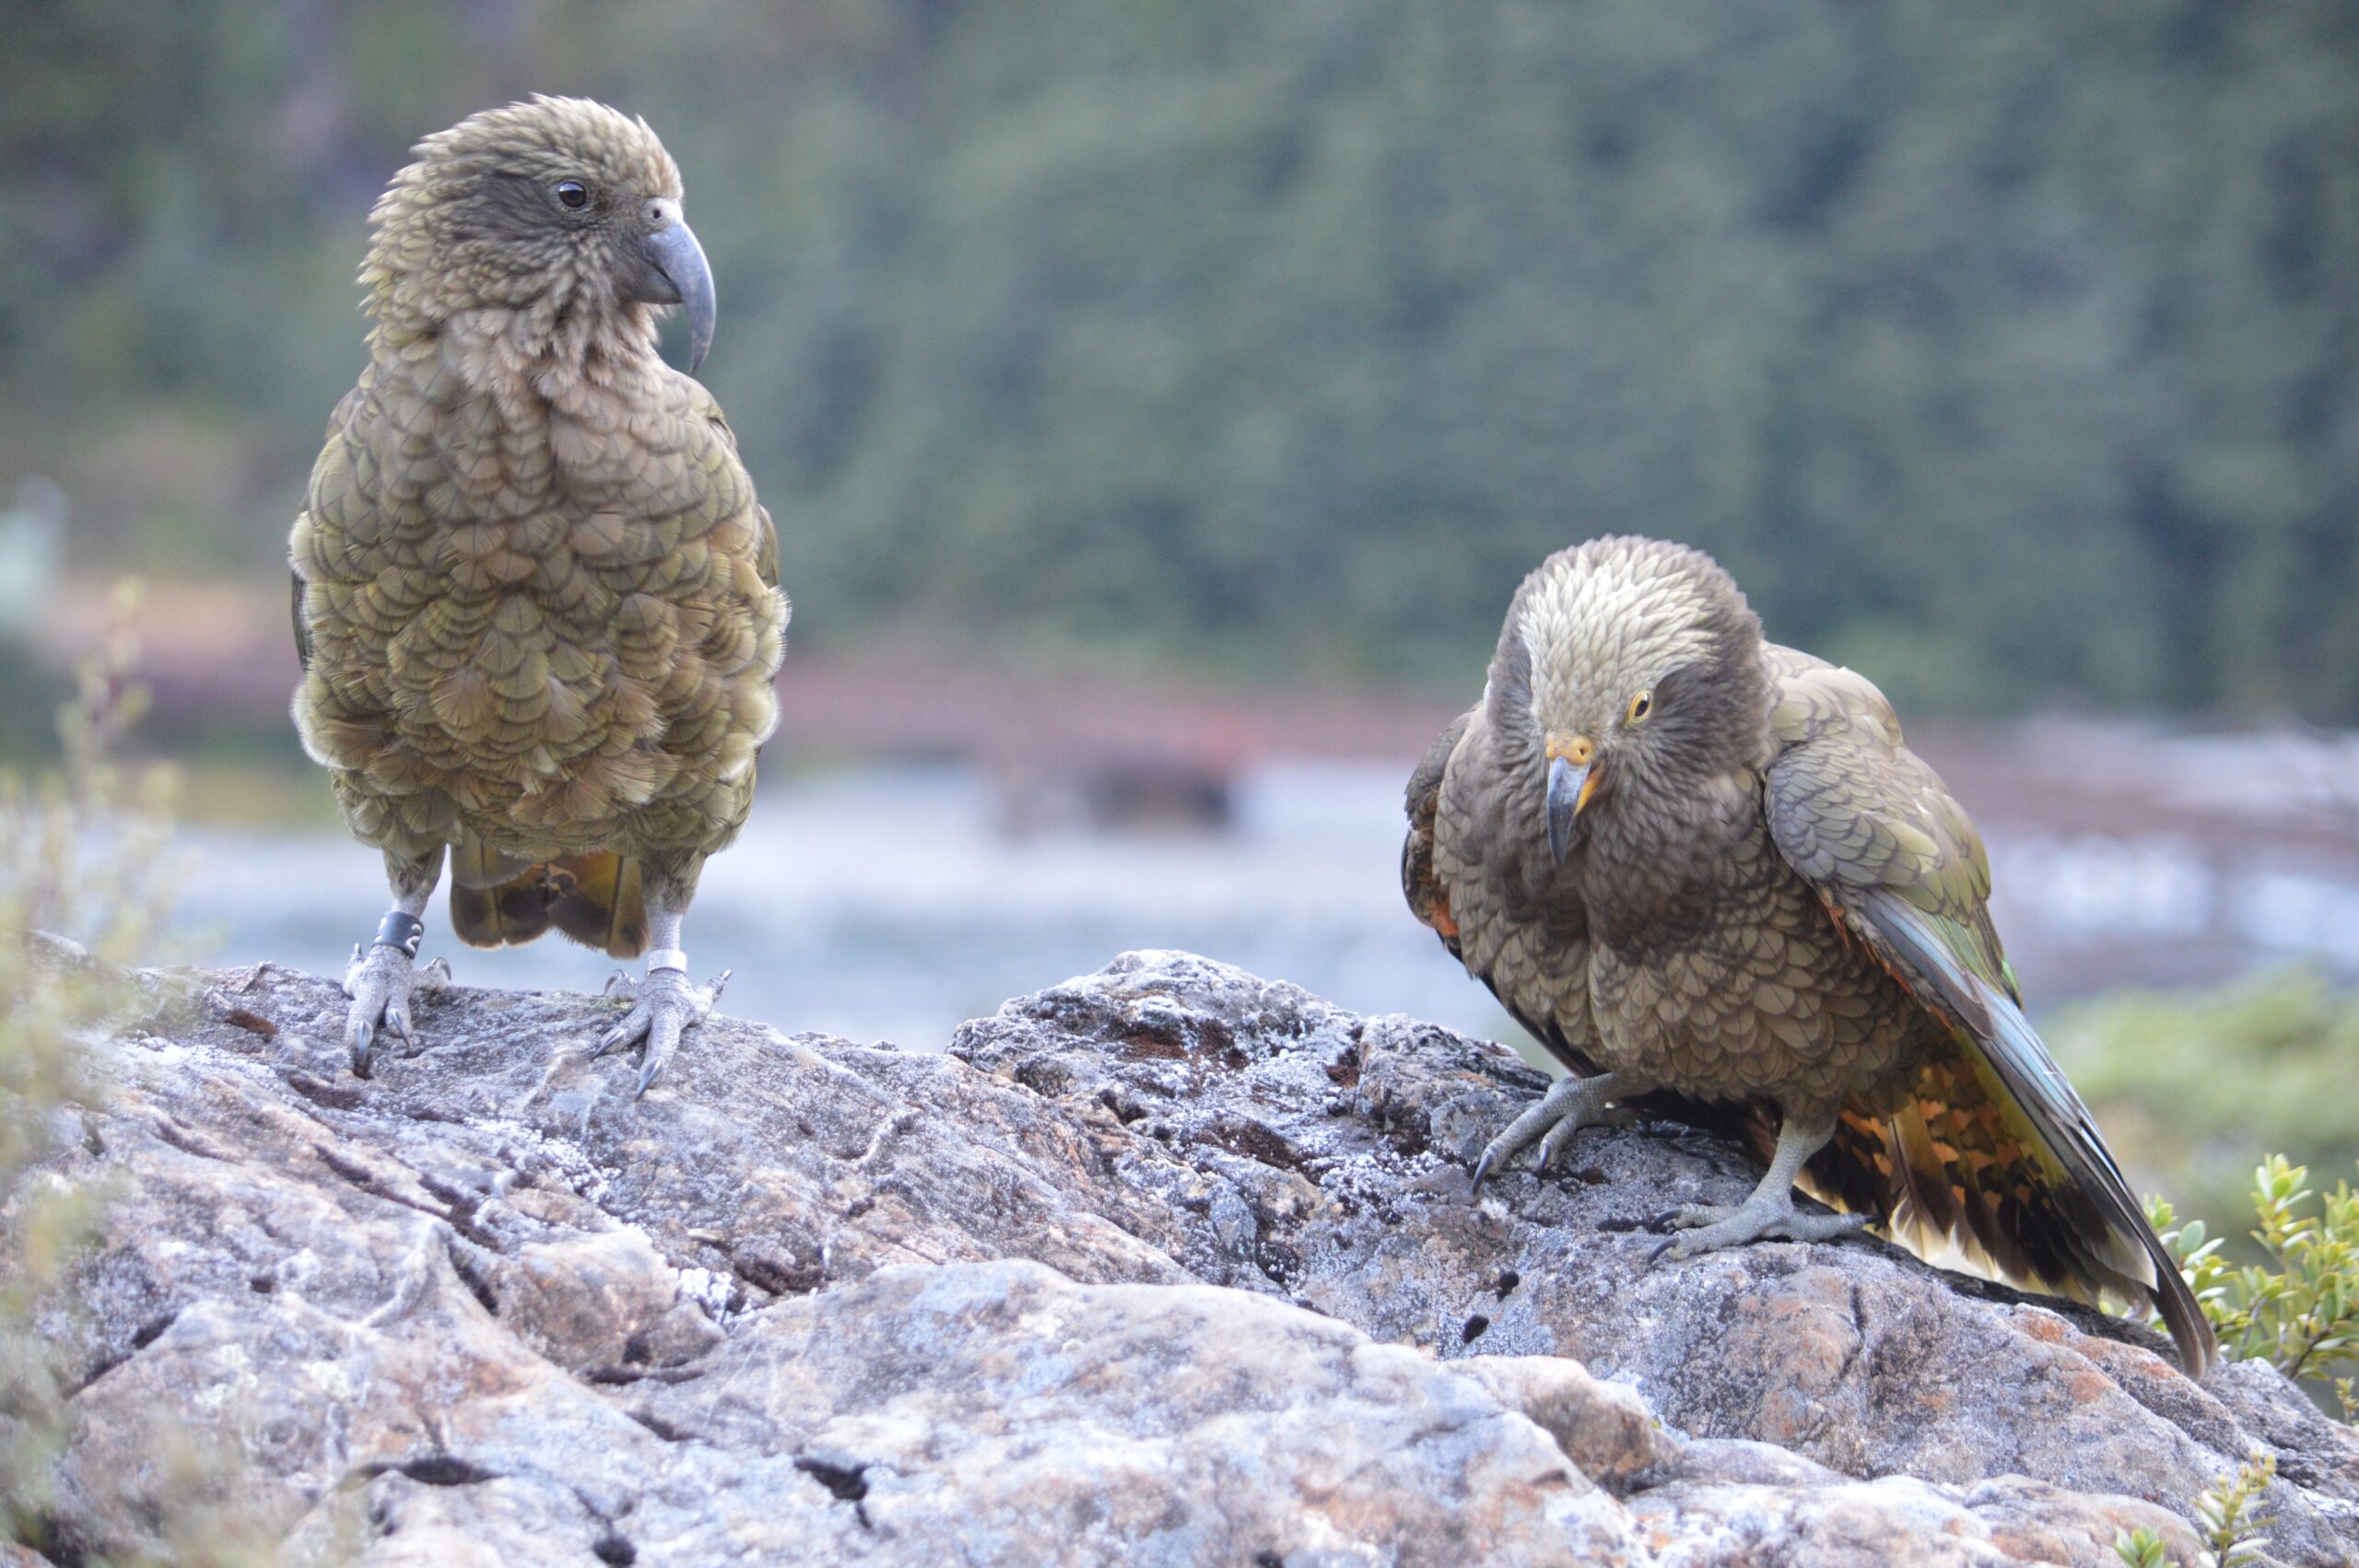 This photo features an Adult Kea on the left, identified by the lack of color on its face. The kea on the right is a juvenile, identified by the yellow on its eyes/beak and light feathers on the head